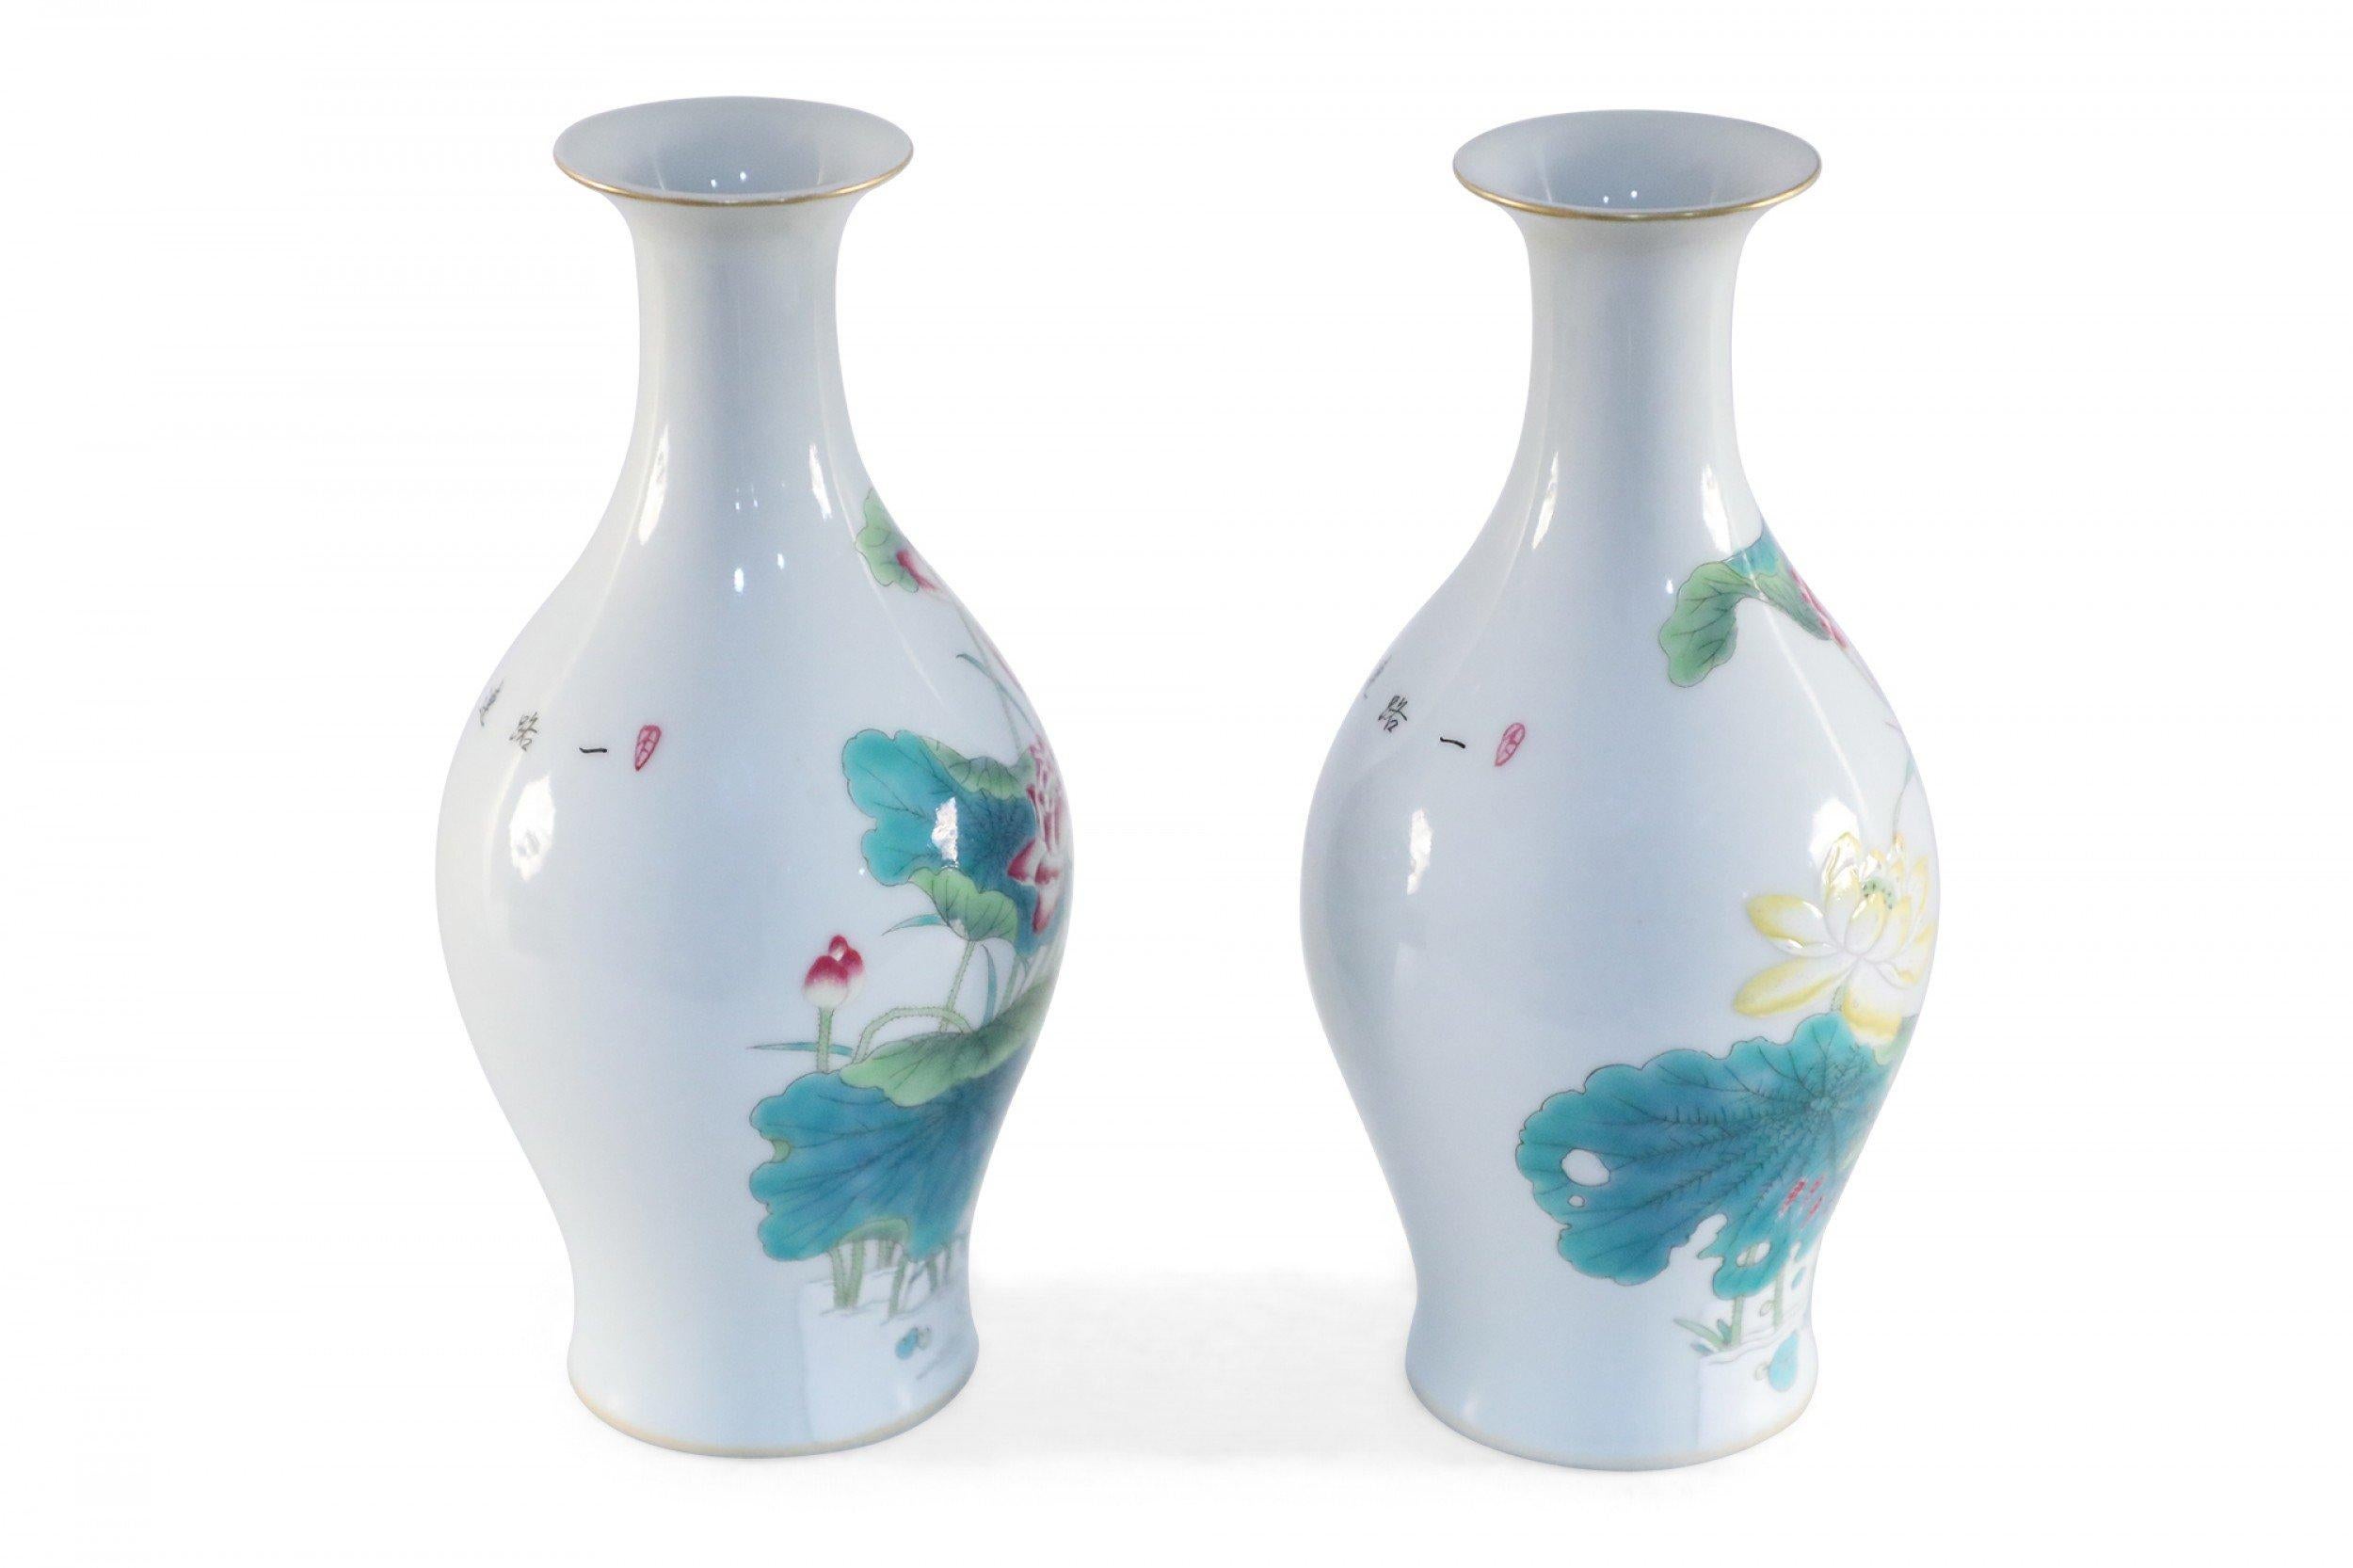 Pair of Chinese White Famille Rose Pear-Shaped Porcelain Vases 1